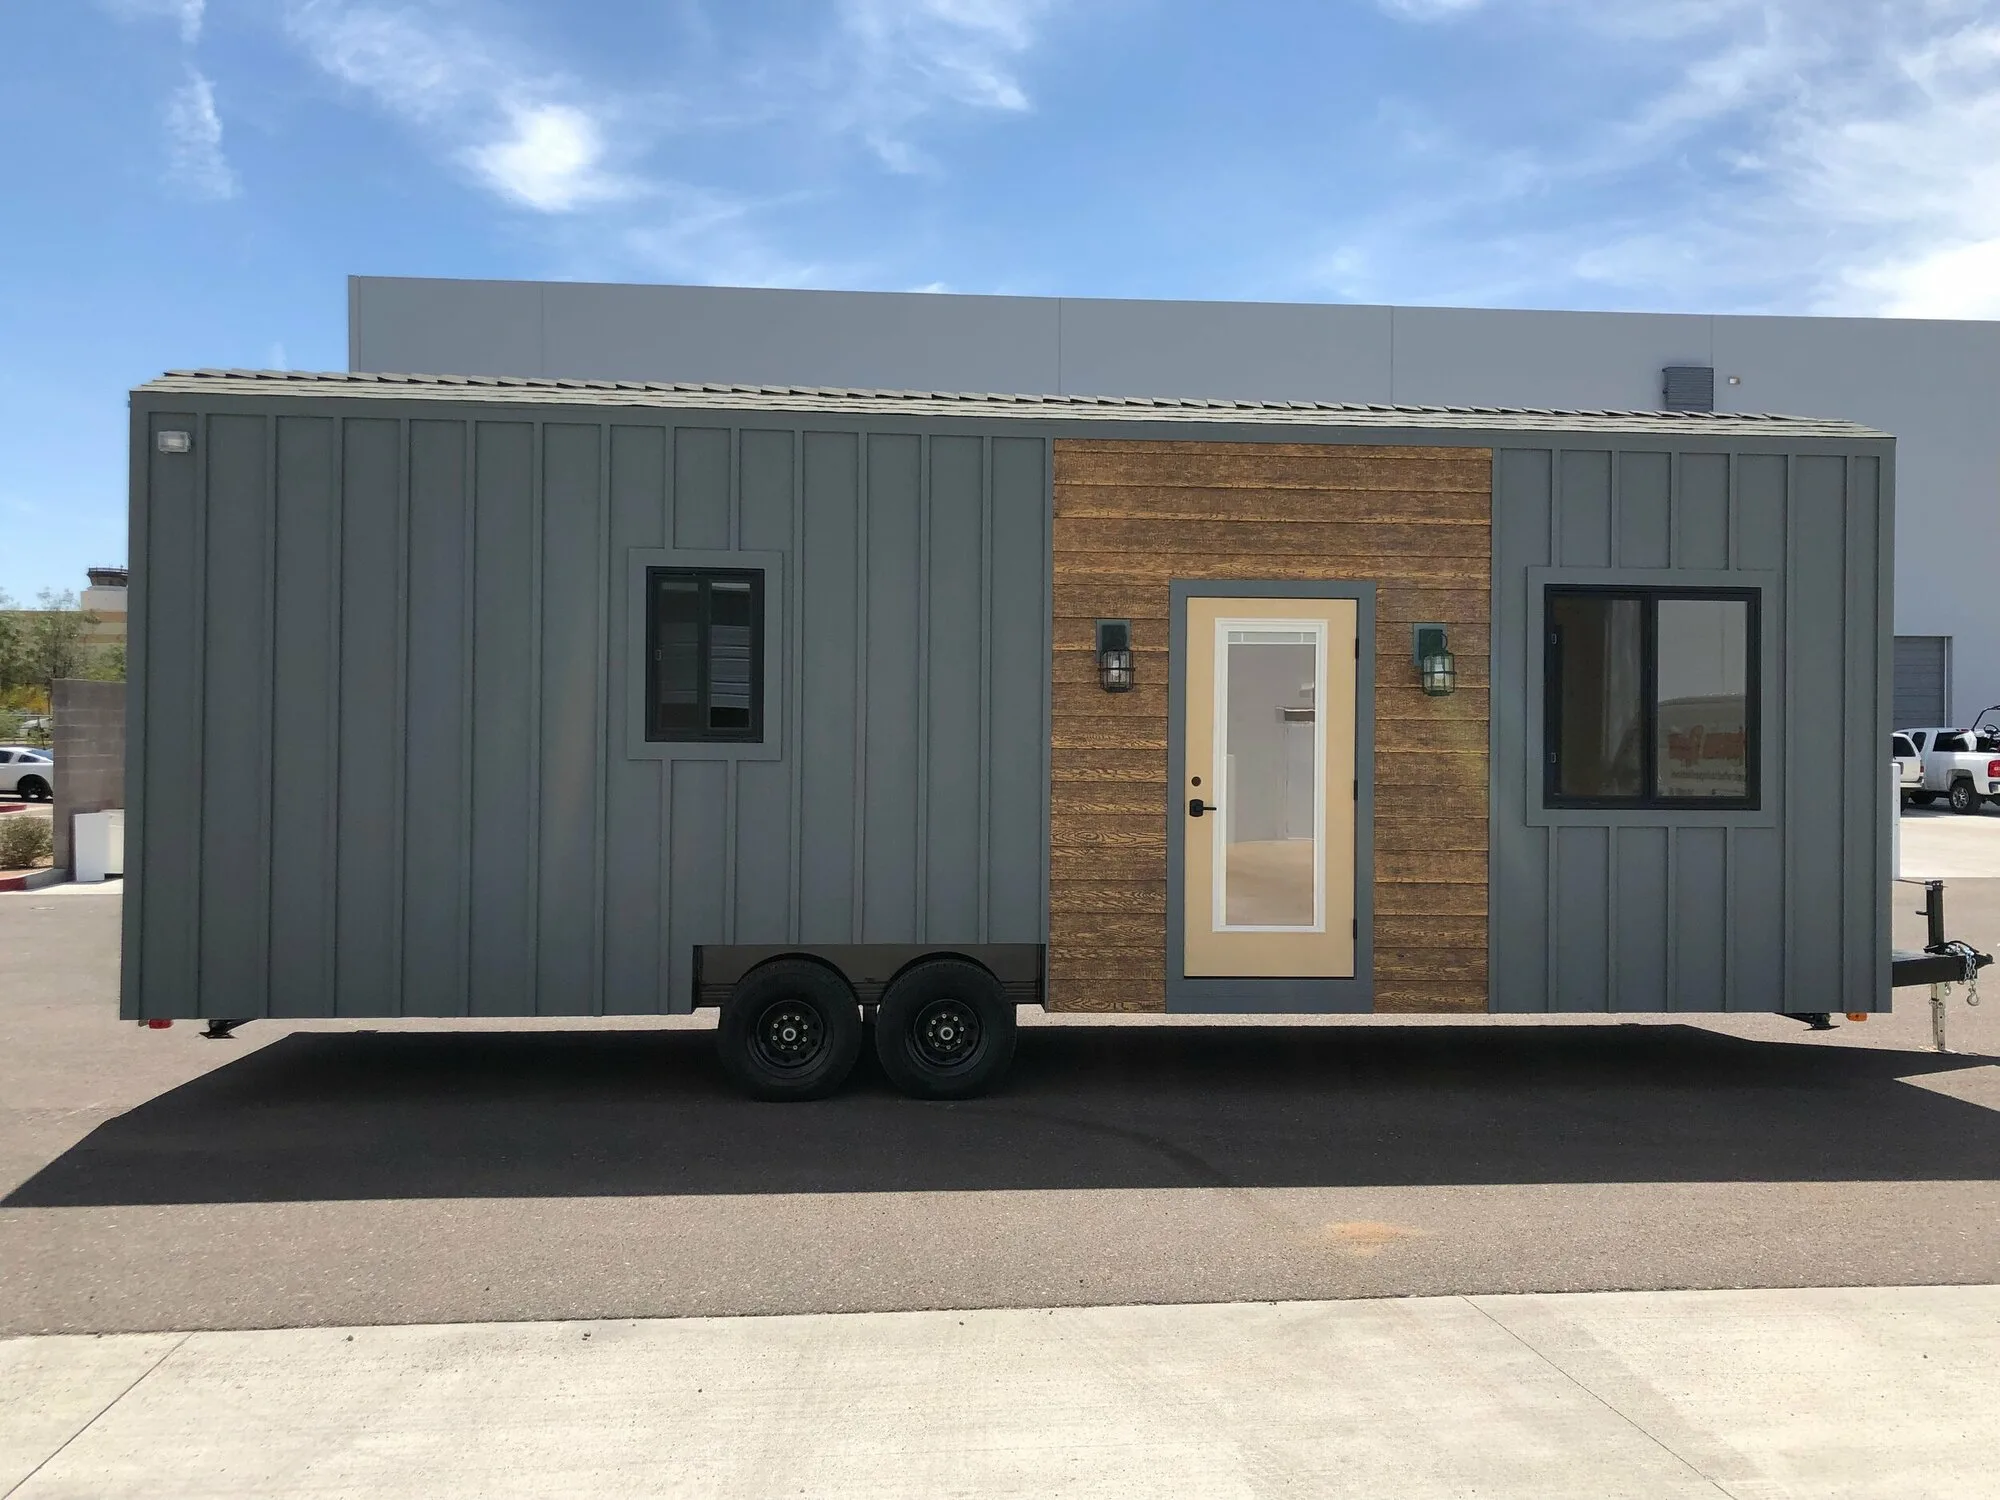 Front View - Flat by Uncharted Tiny Homes